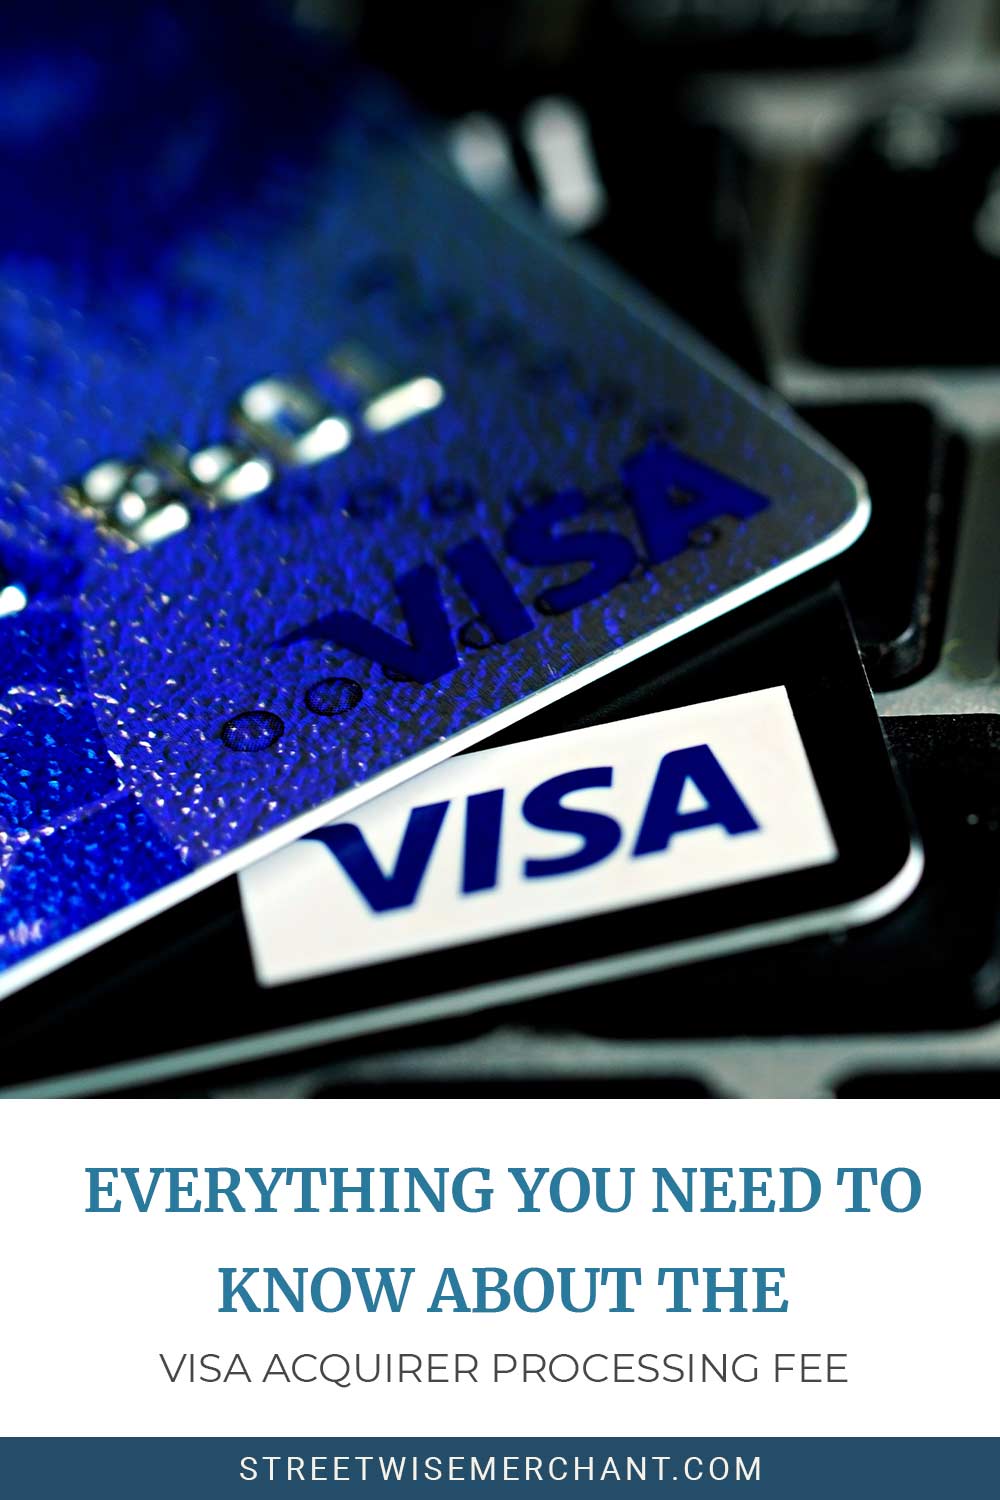 Visa cards on a laptop keyboard - Everything You Need to Know About the Visa Acquirer Processing Fee.